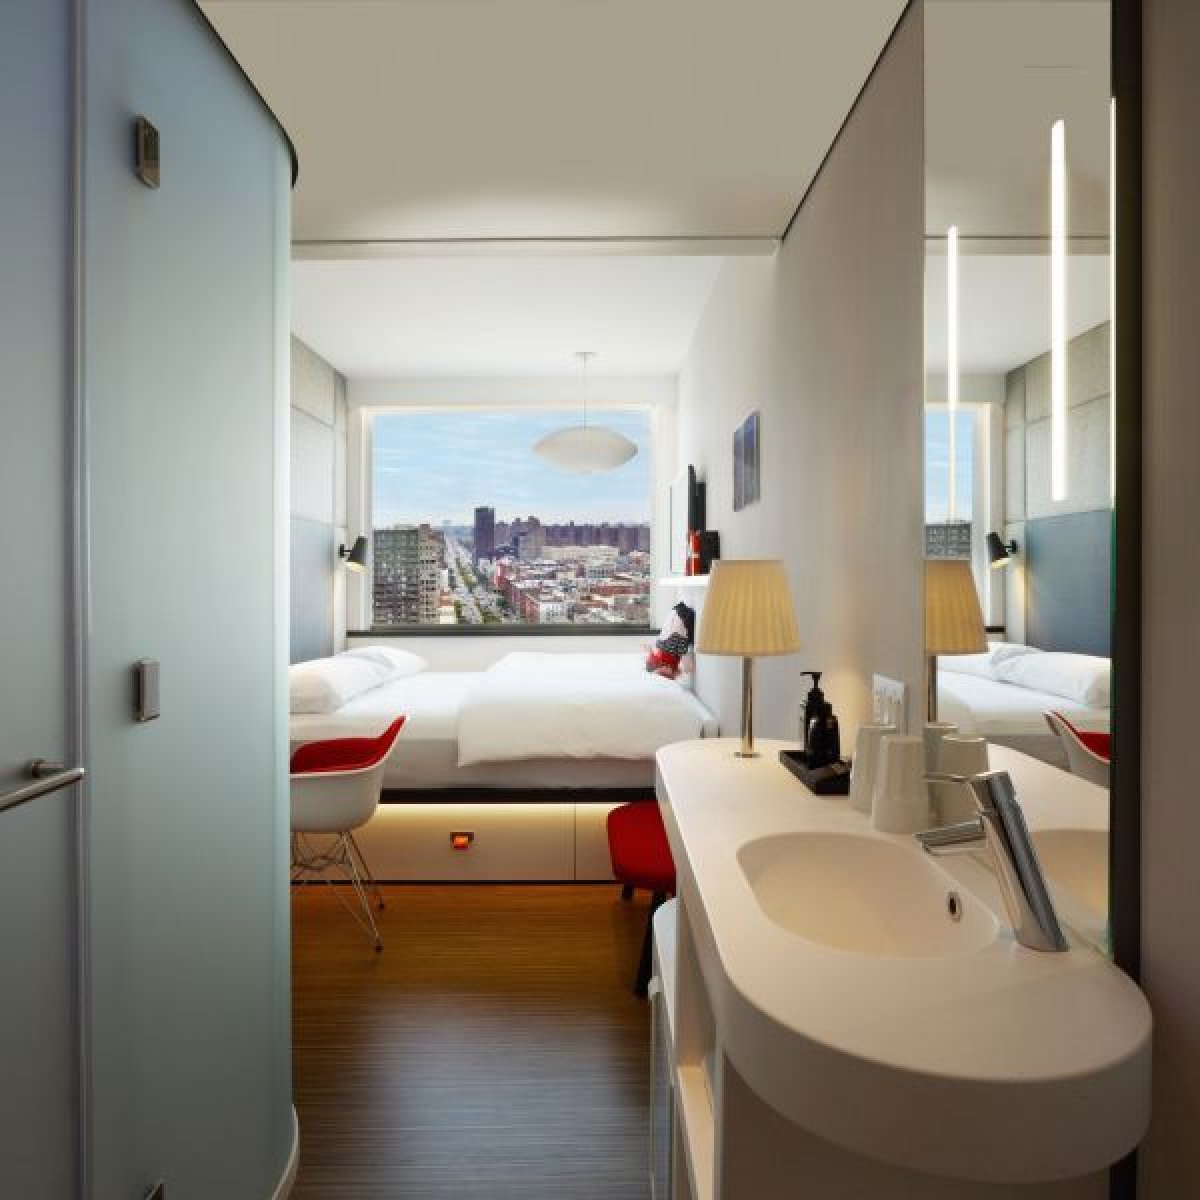 Hotels Lower East Side - CitizenM New York Bowery